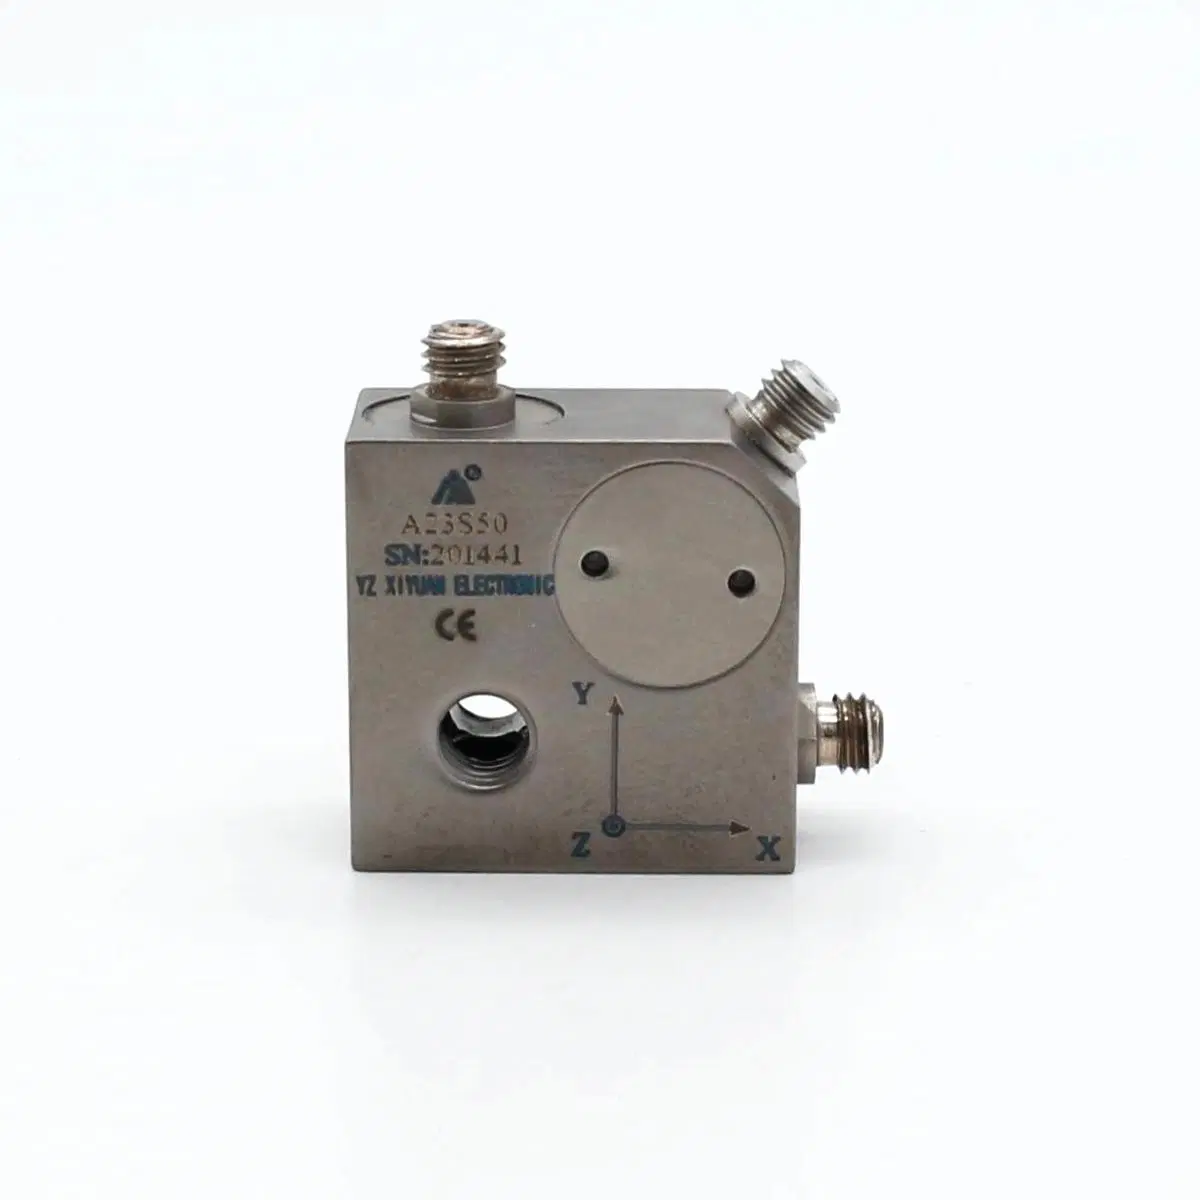 Iepe Precision Machining Light Weight Universal Triaxial Voltage Piezoelectric Acceleration Sensor (A23S50)